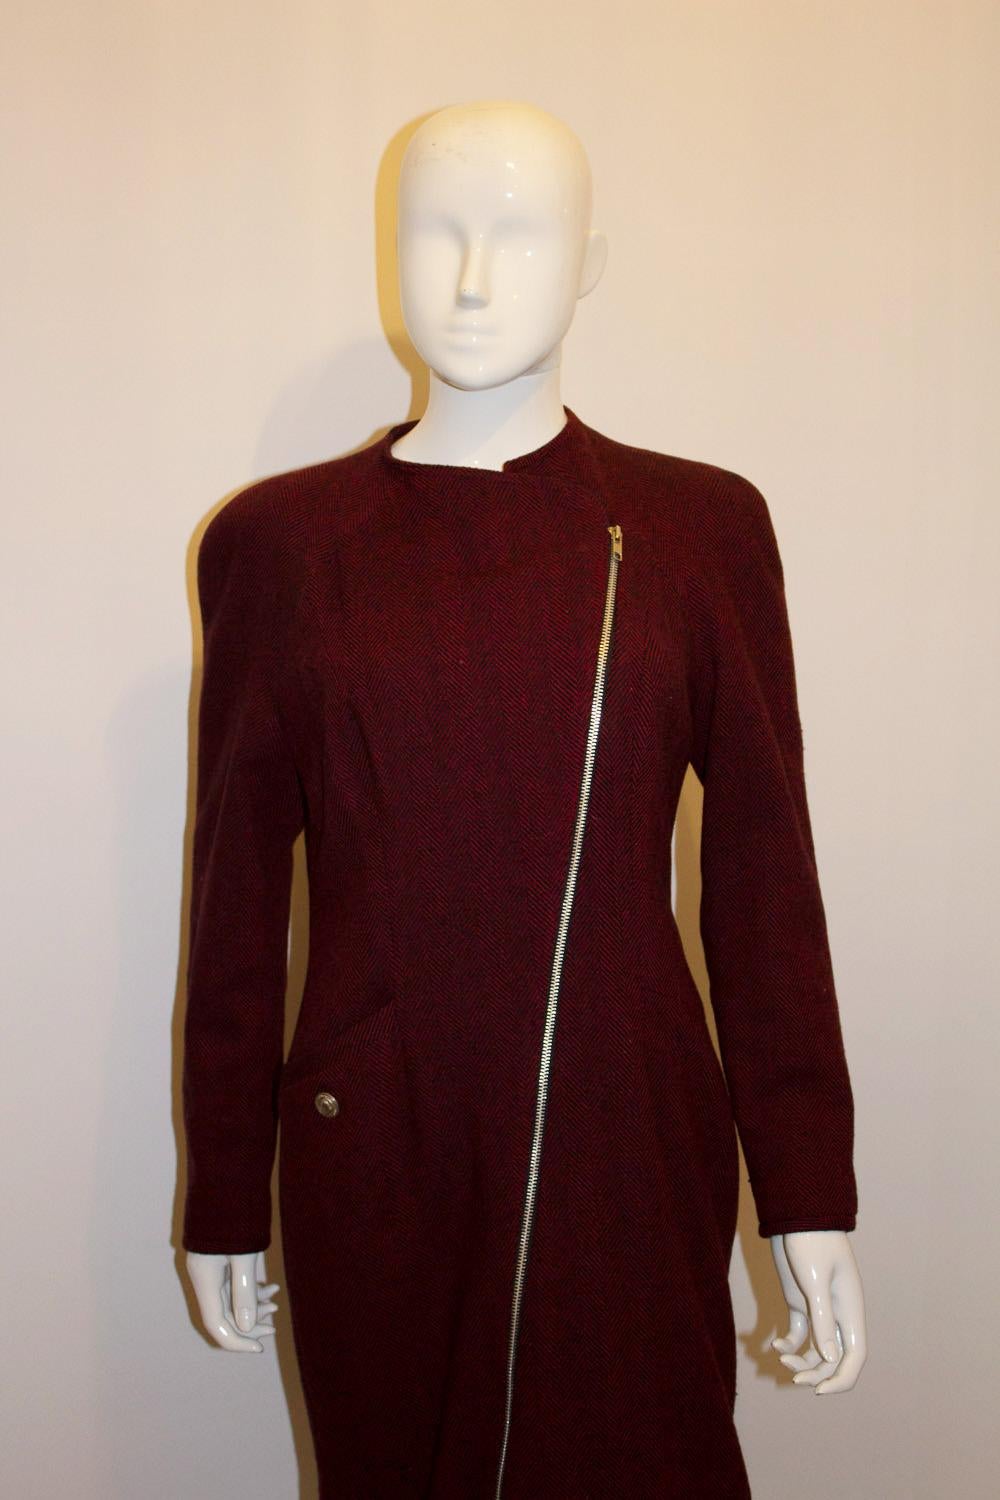 Vtntage Pallant London Red and Black Wool Coat Dress For Sale 3